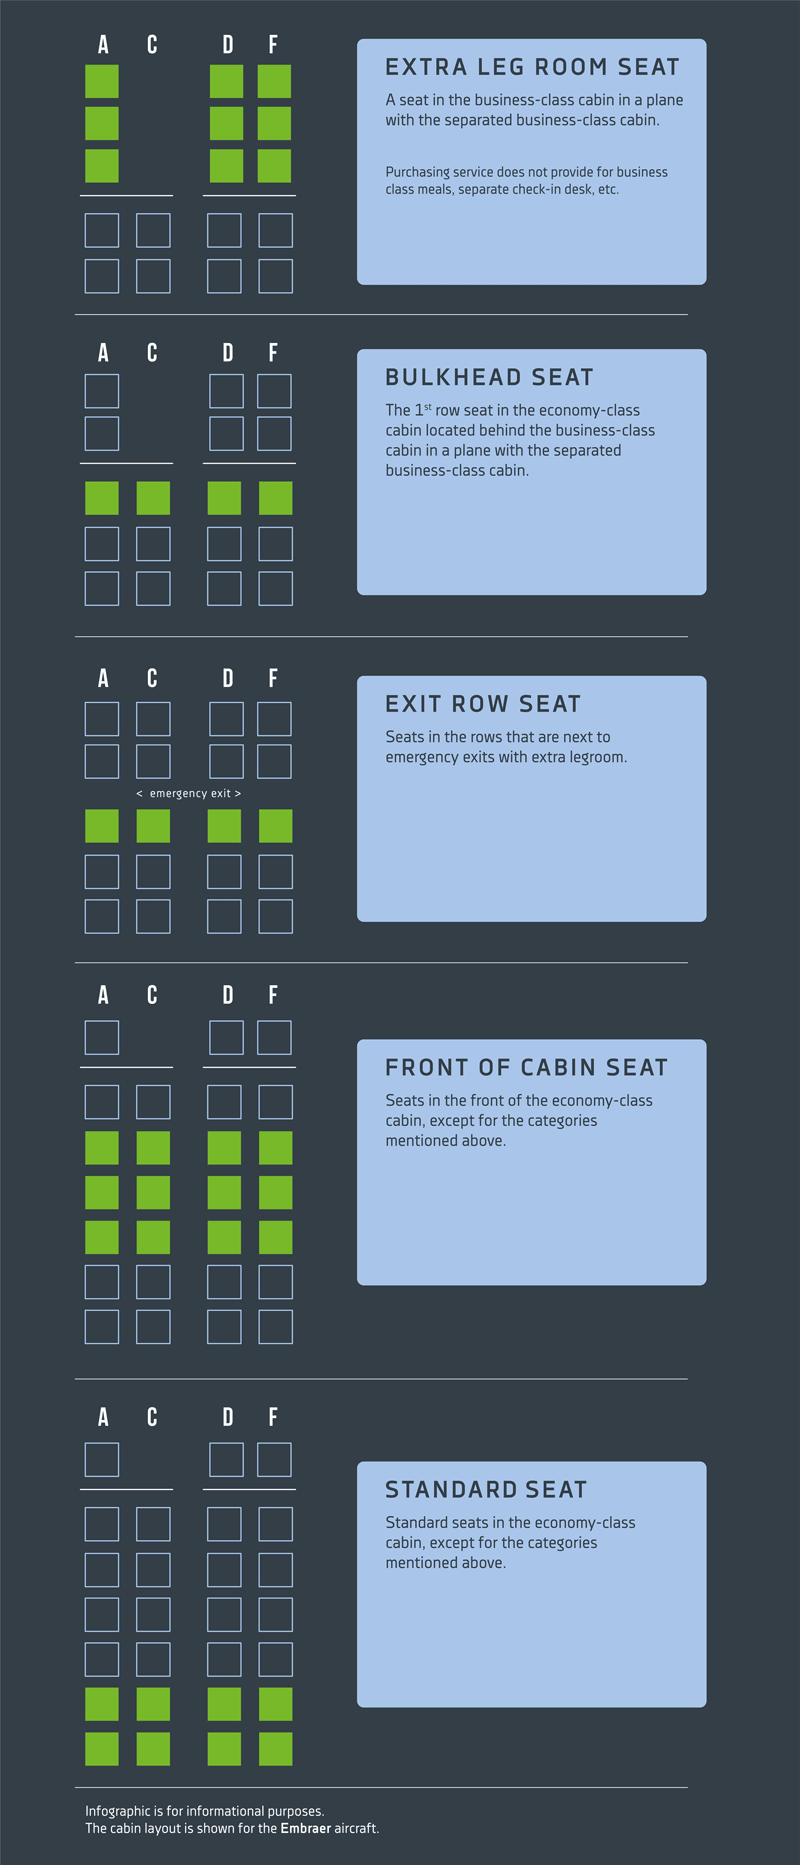 Seat selection